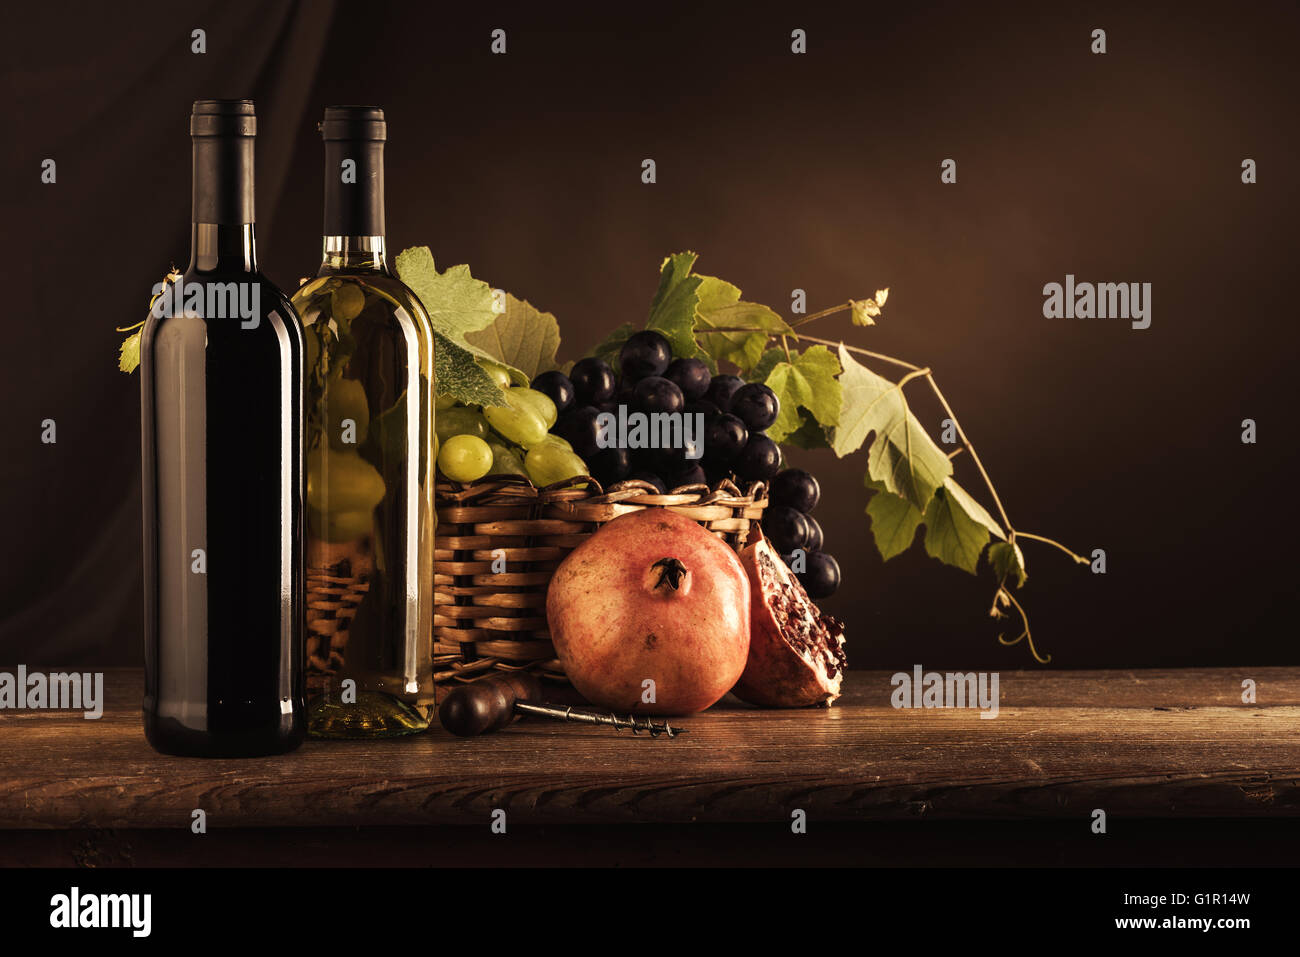 Wine bottles, corkscrew and grapes in a basket on a wooden table, wine tasting still life Stock Photo